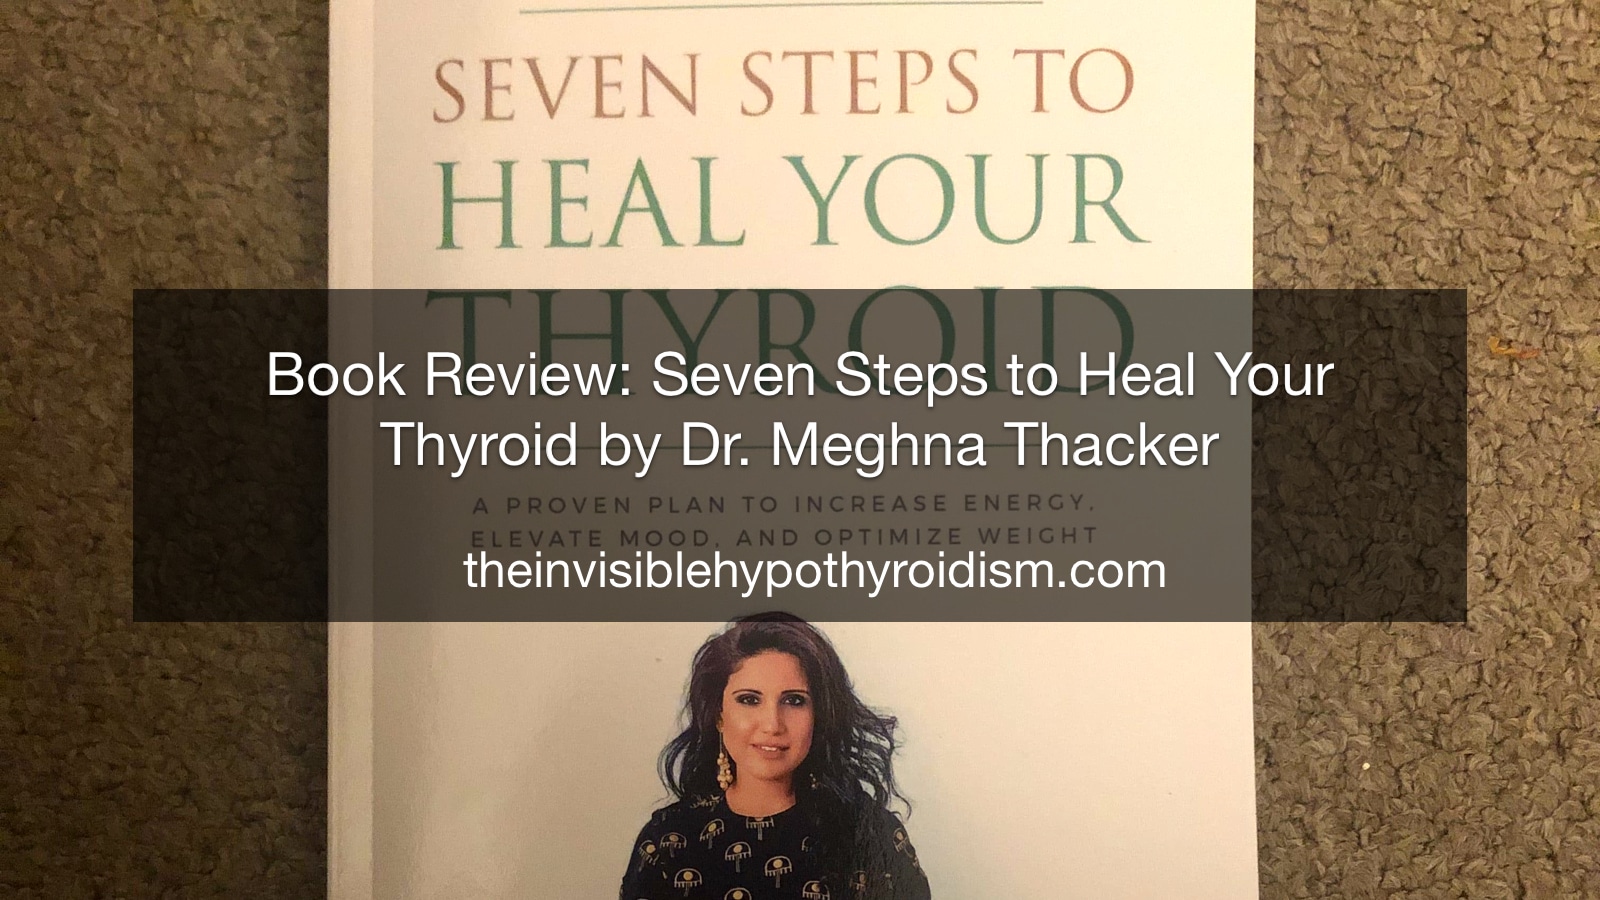 Book Review: Seven Steps to Heal Your Thyroid by Dr. Meghna Thacker